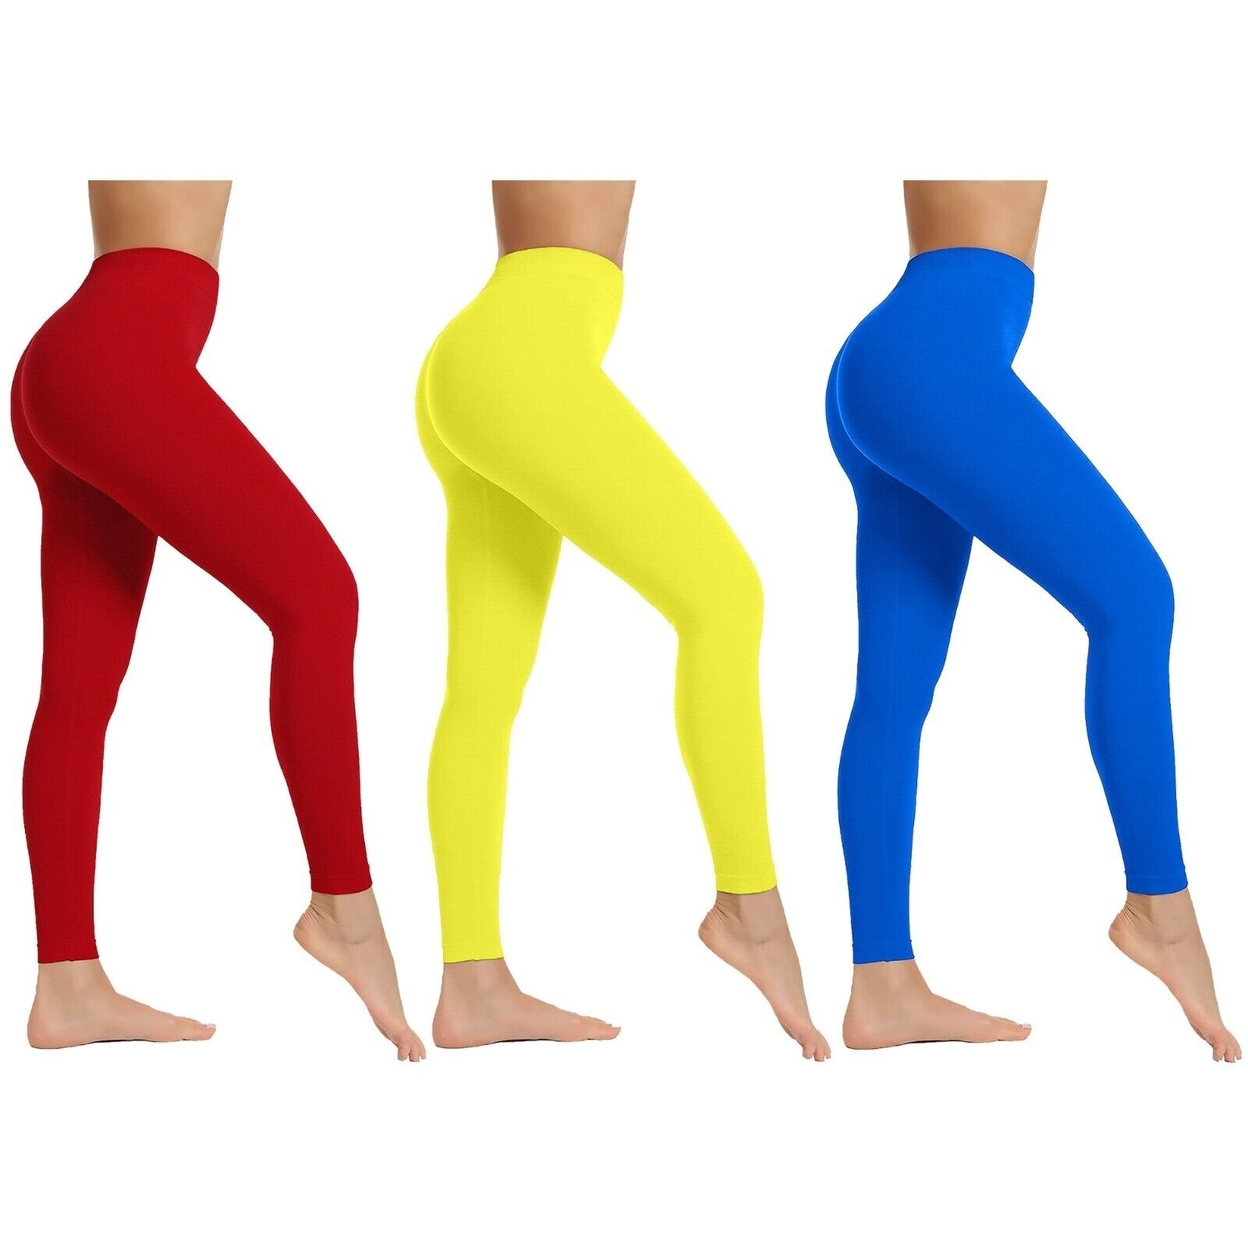 3-Pack: Women's High Waist Super Soft Active Athlete Stretch Yoga Cozy Leggings - Blue,red,yellow, Large